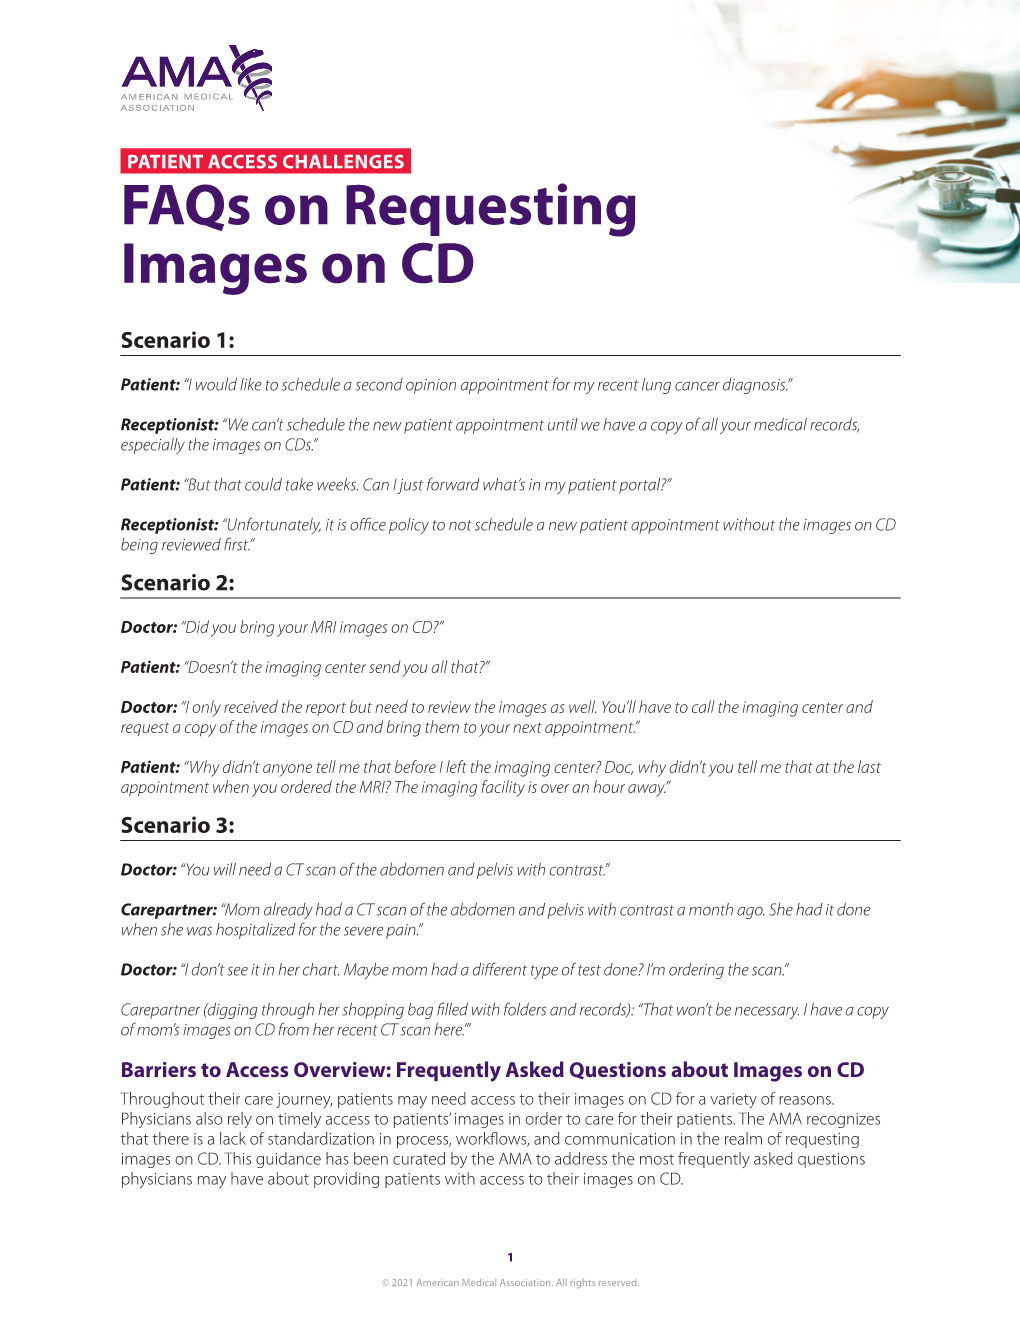 Faqs on Requesting Images on CD